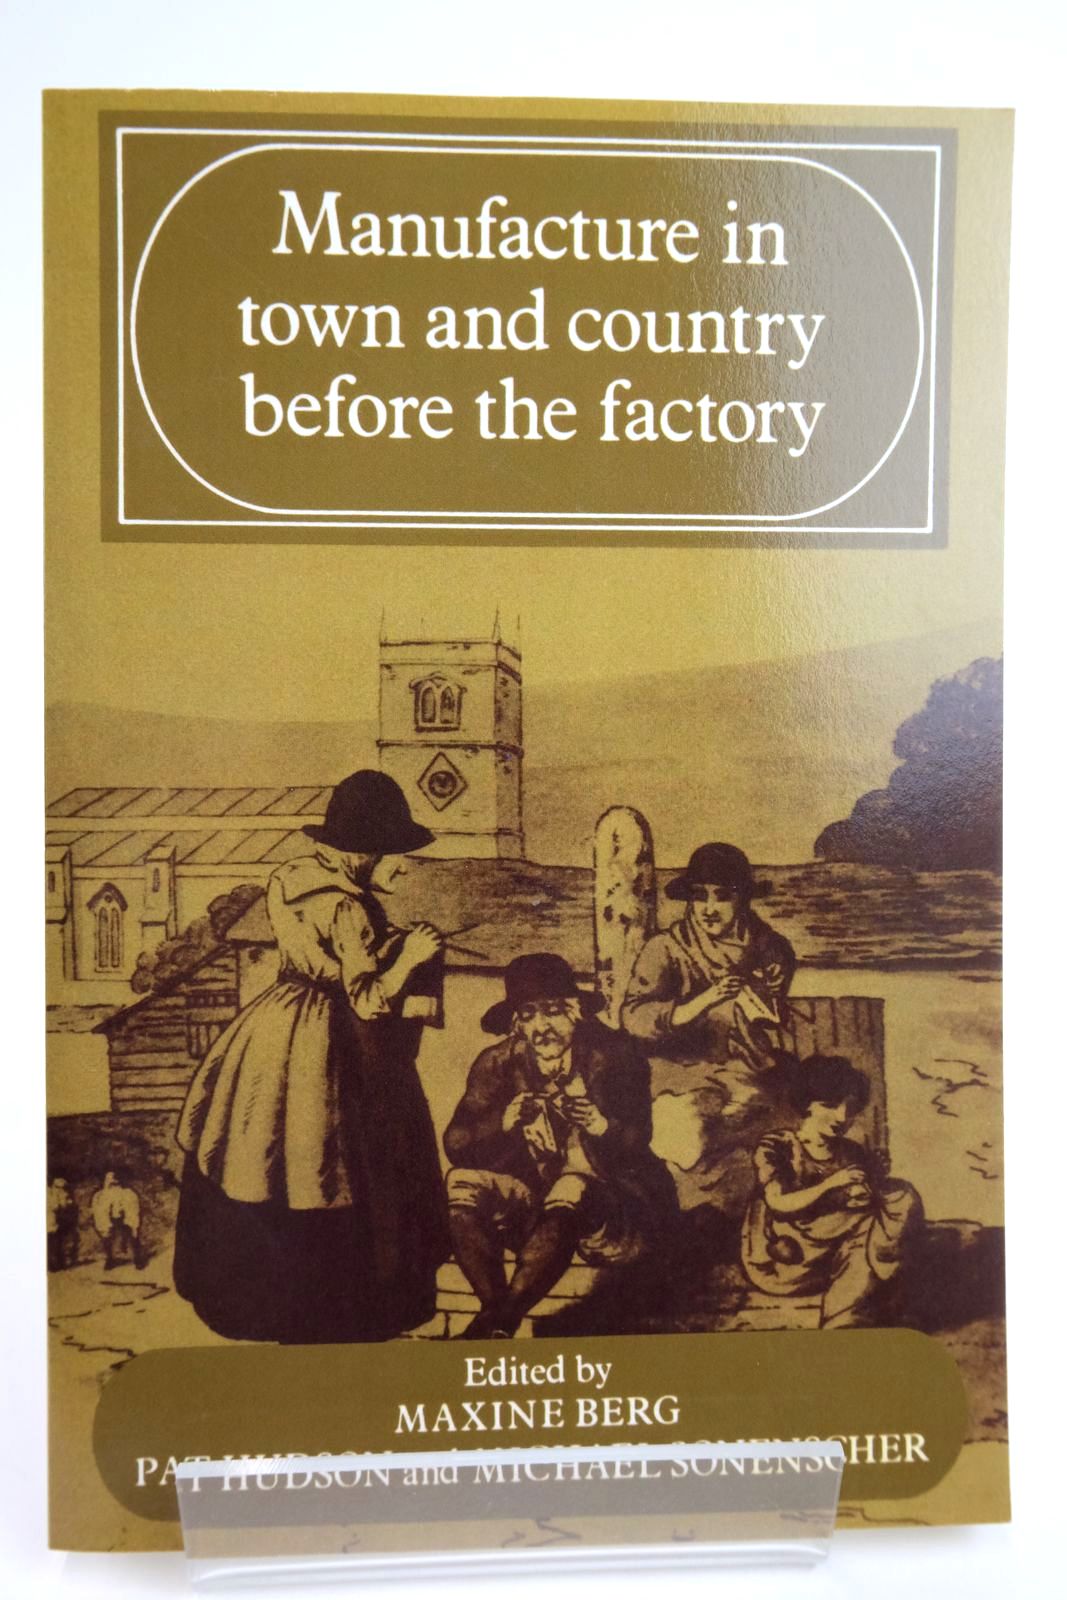 Photo of MANUFACTURE IN TOWN AND COUNTRY BEFORE THE FACTORY written by Berg, Maxine Hudson, Pat Sonenscher, Michael published by Cambridge University Press (STOCK CODE: 2135966)  for sale by Stella & Rose's Books